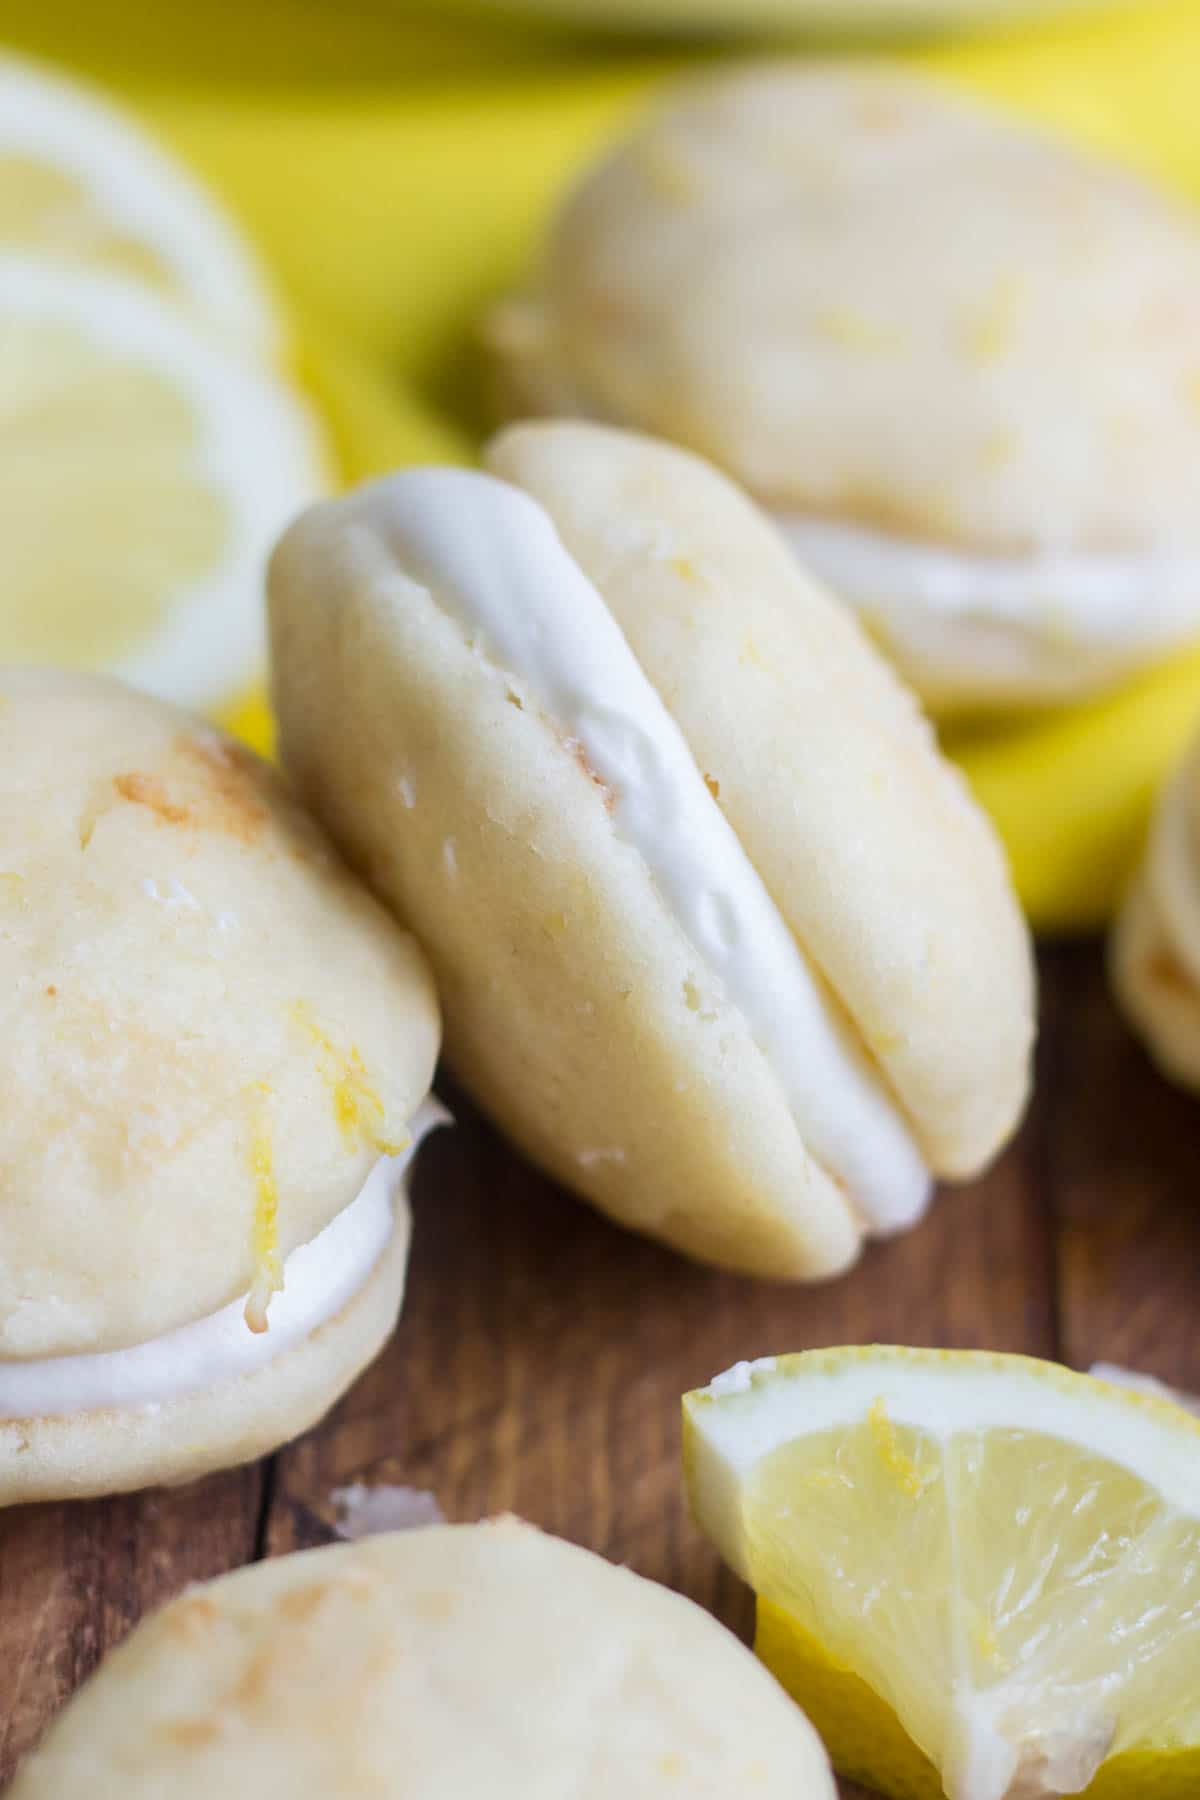 Sweet and tangy, these lemon whoopie pies are a cloud-like dessert you won't want to miss this spring. True to a whoopie pie, these are light and fluffy cake-like cookies surrounded by sweet cream cheese frosting. Perfect for spring celebrations!